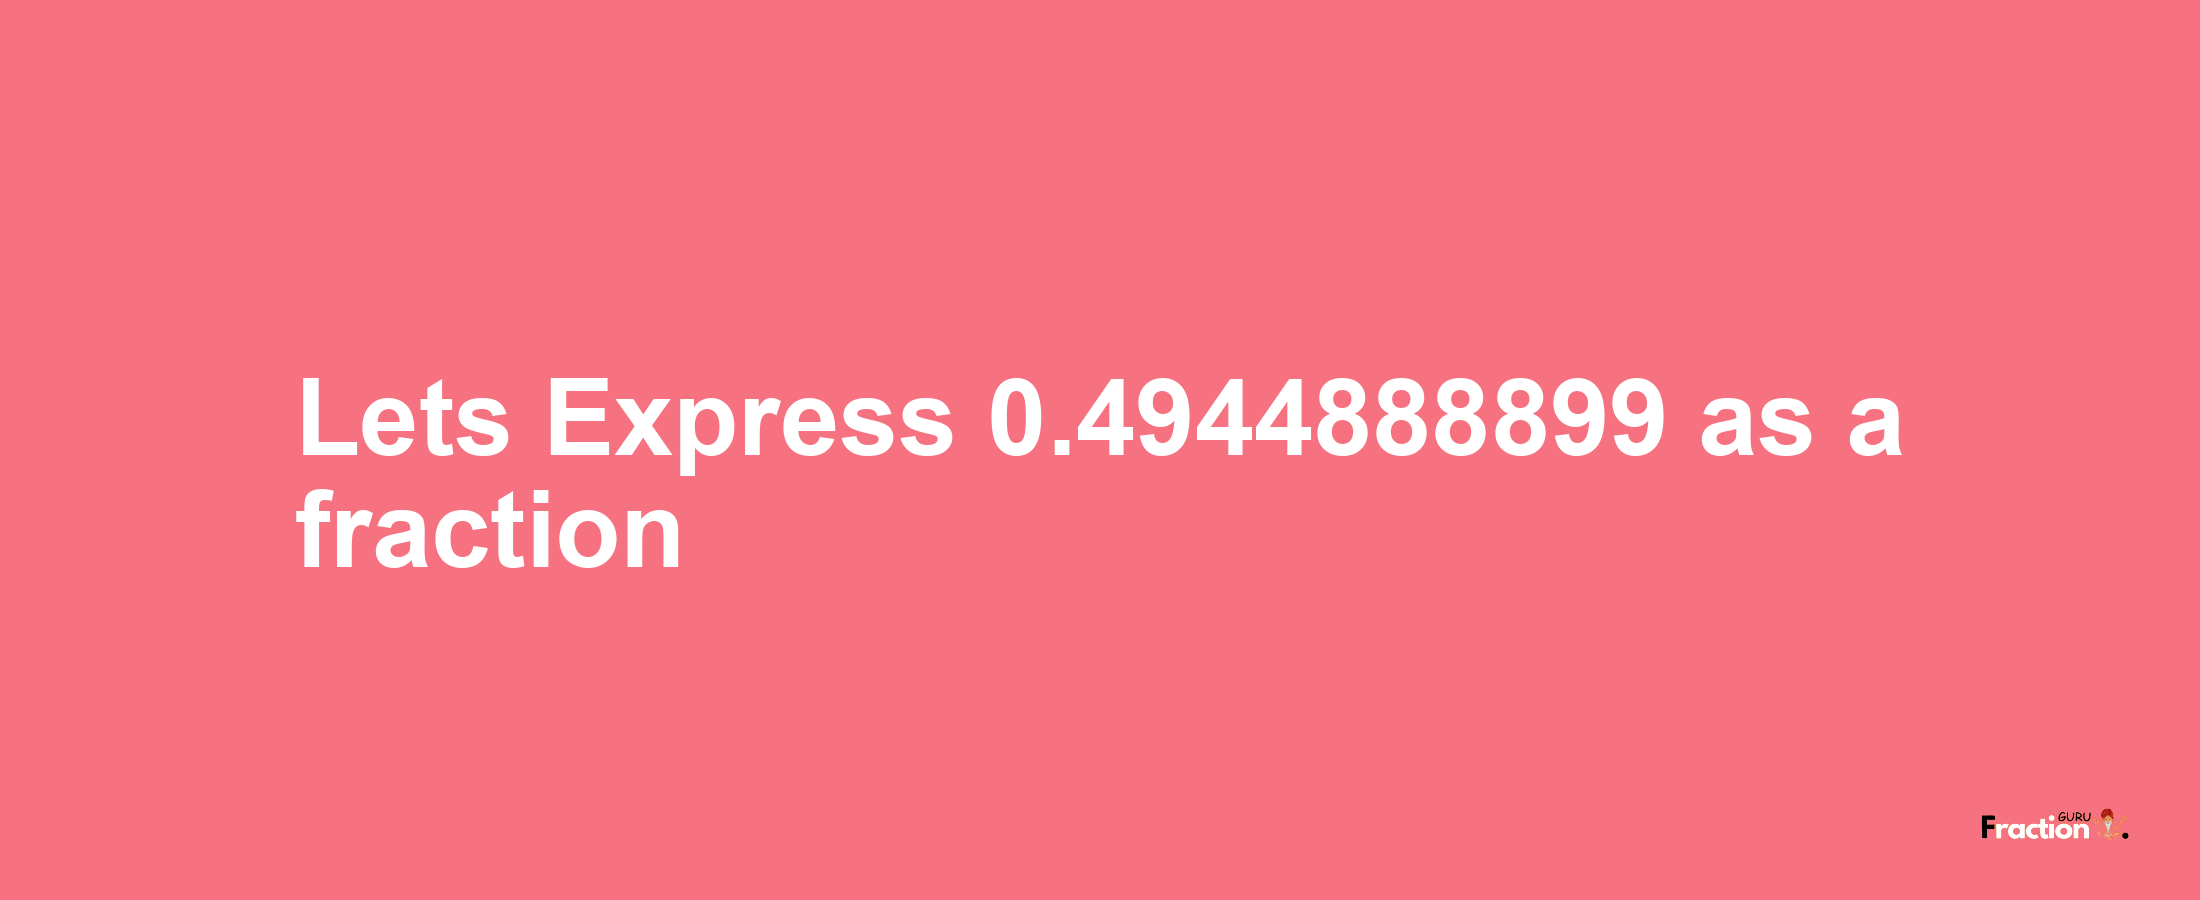 Lets Express 0.4944888899 as afraction